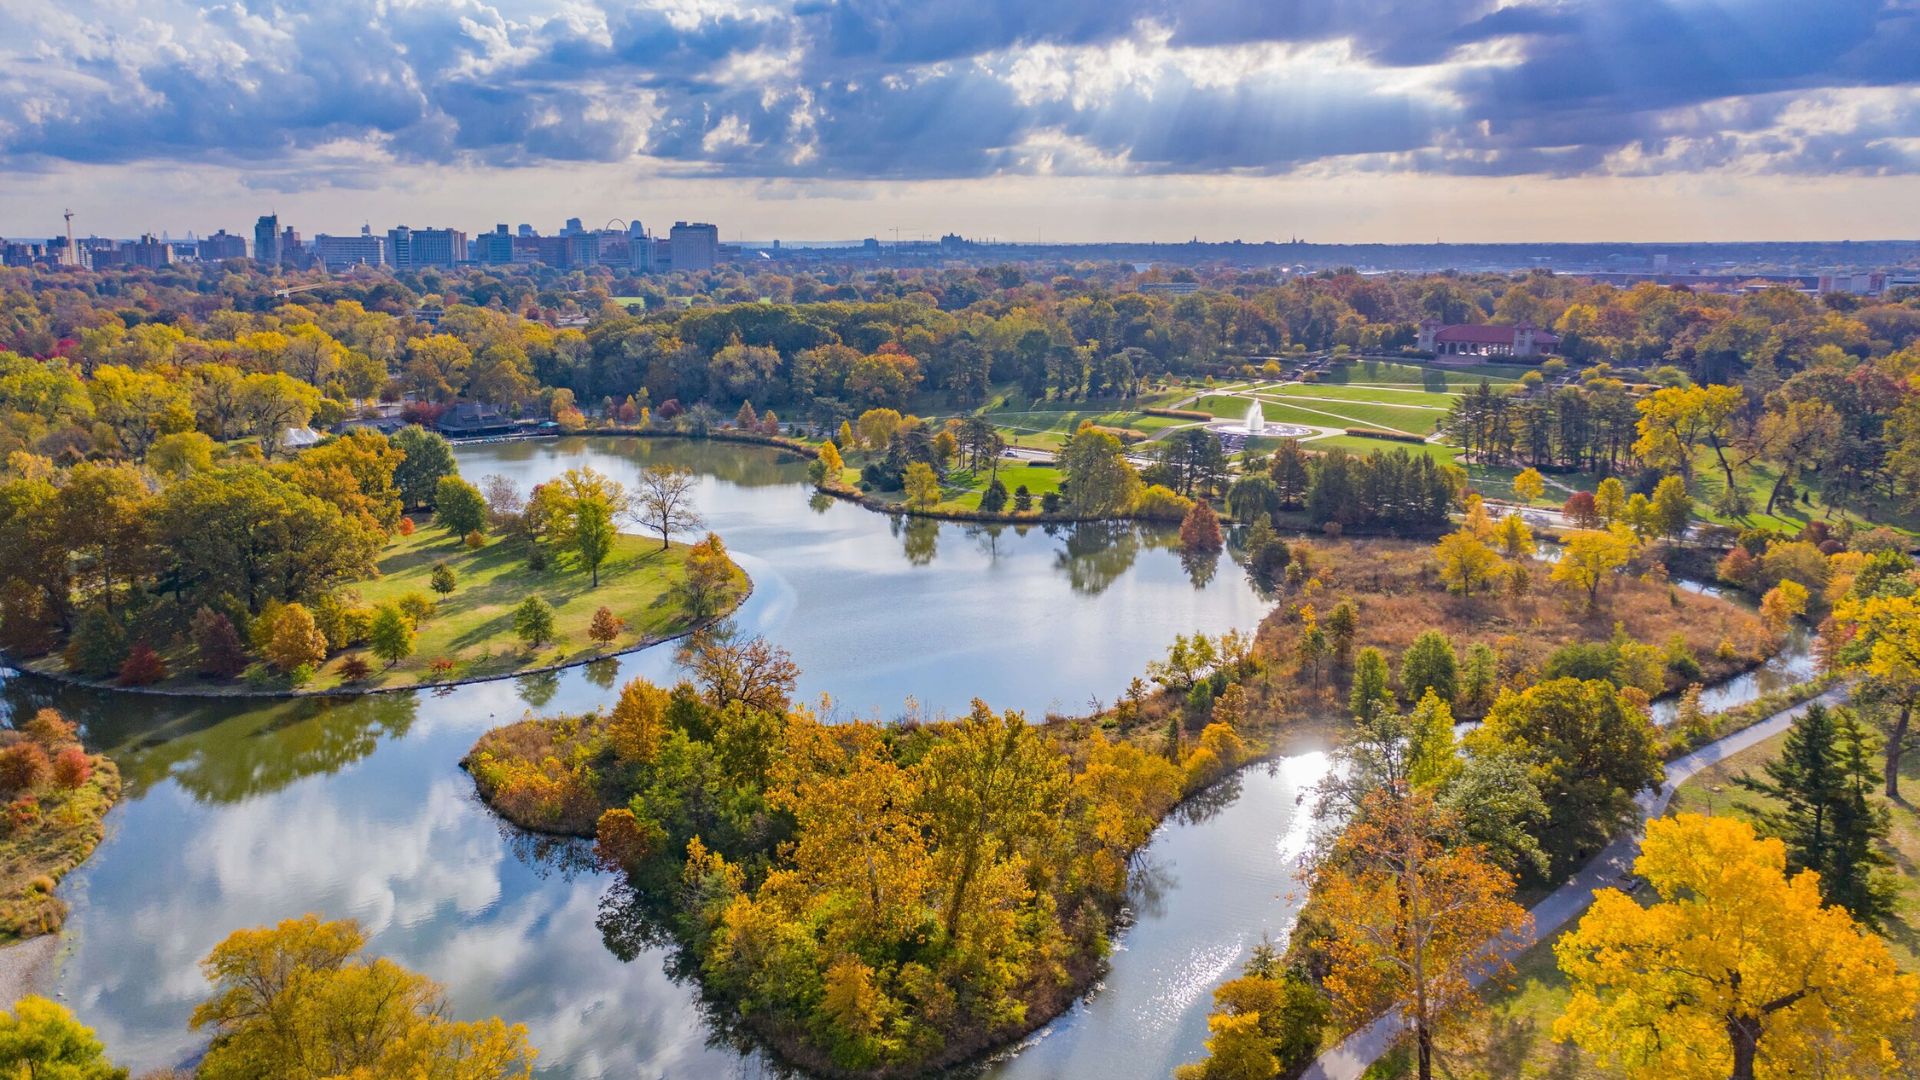 Forest Park features plenty of green space along with world-class attractions.